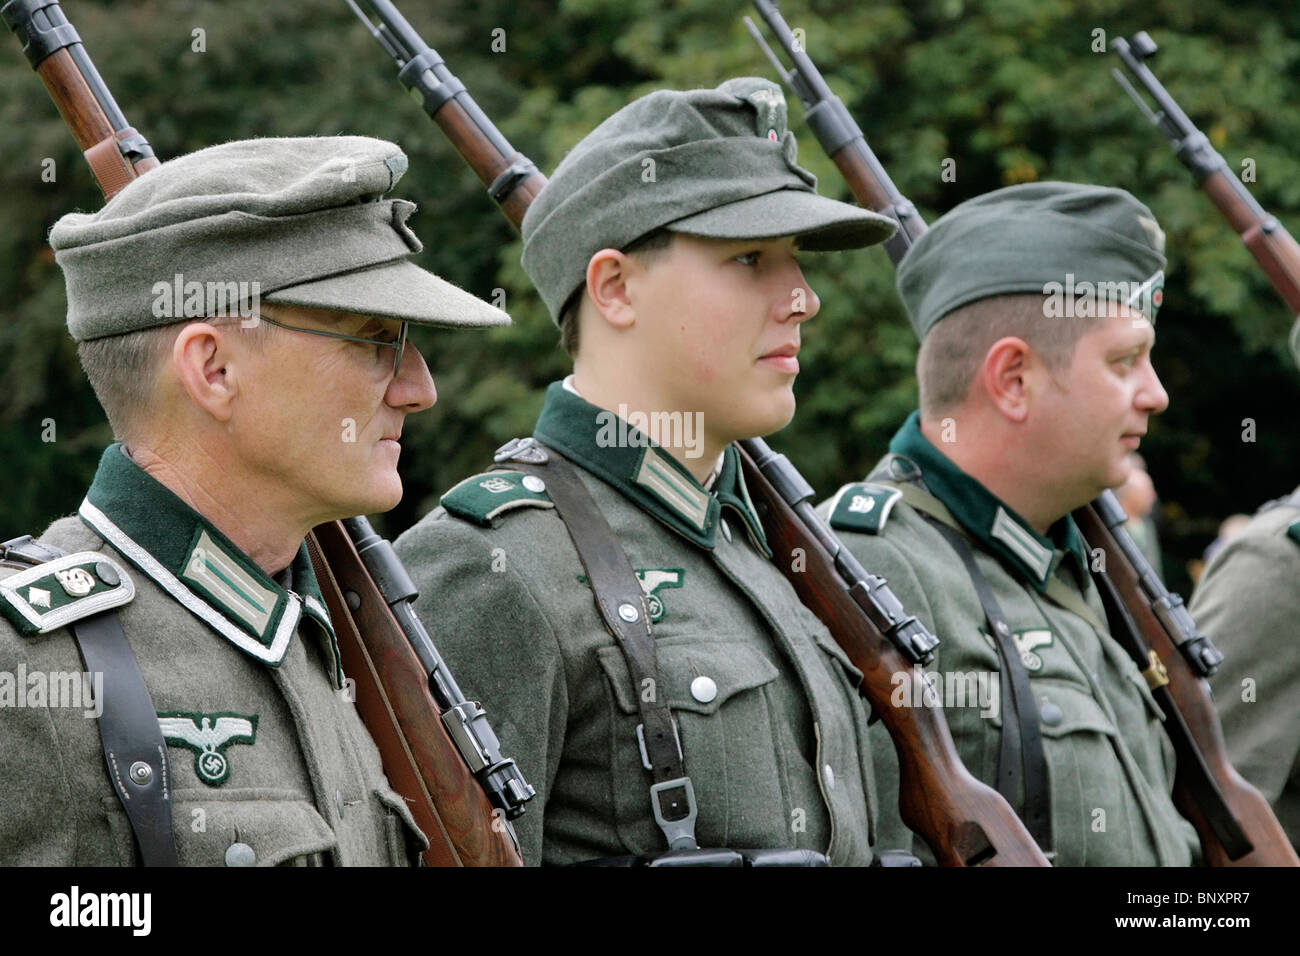 Reenactment of world war 2 german soldiers standing on parade Stock Photo